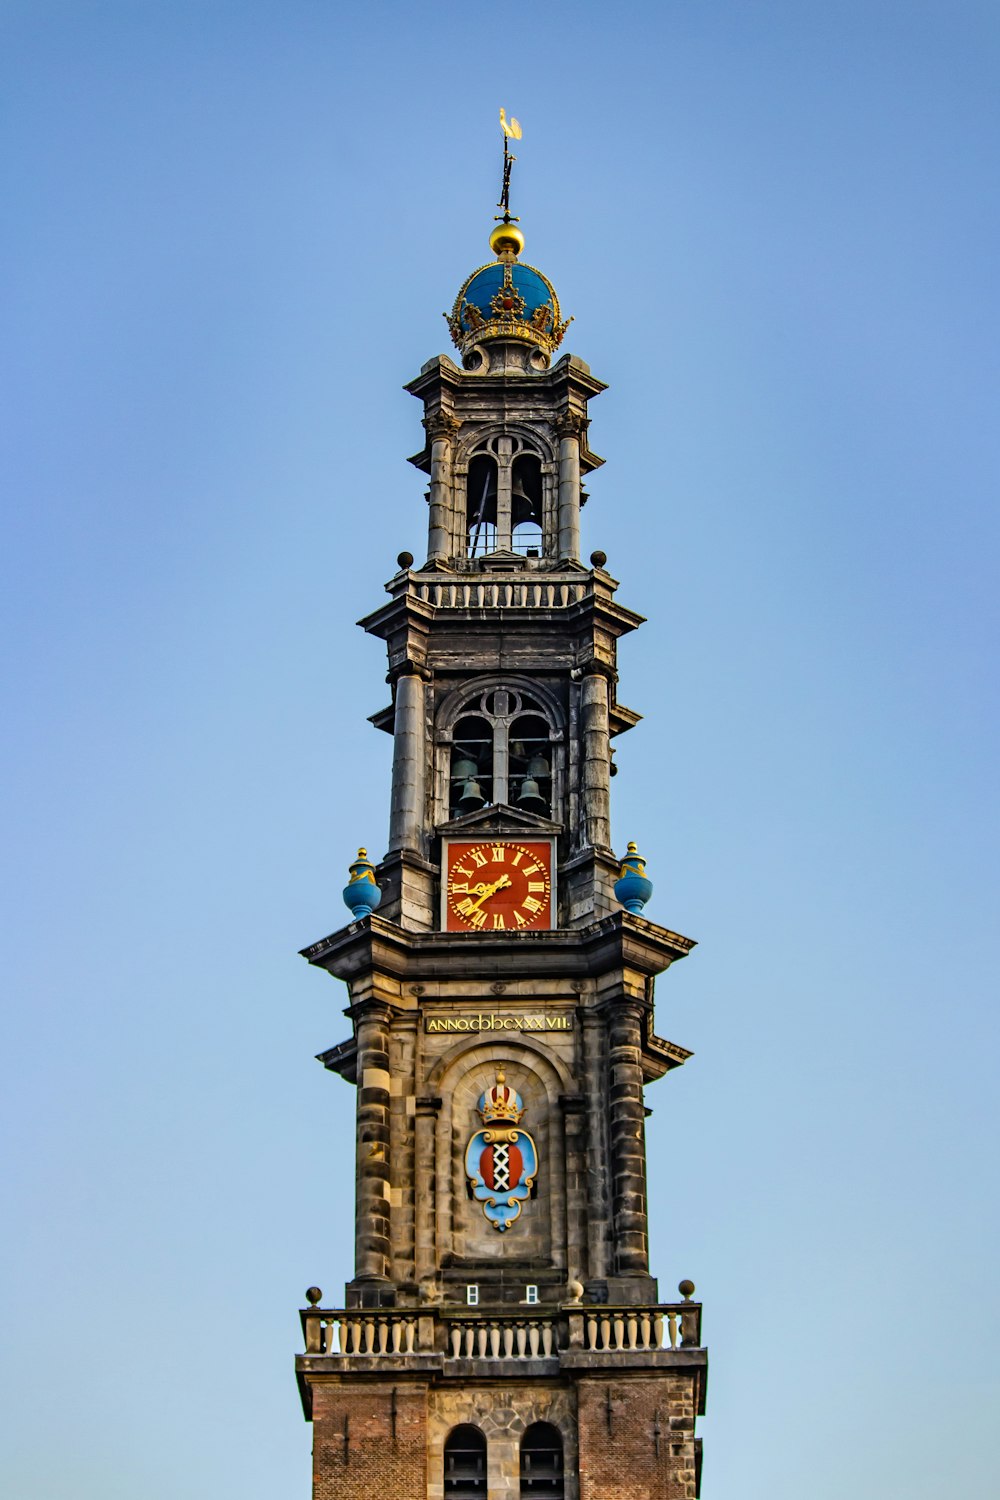 a clock tower with a weather vane